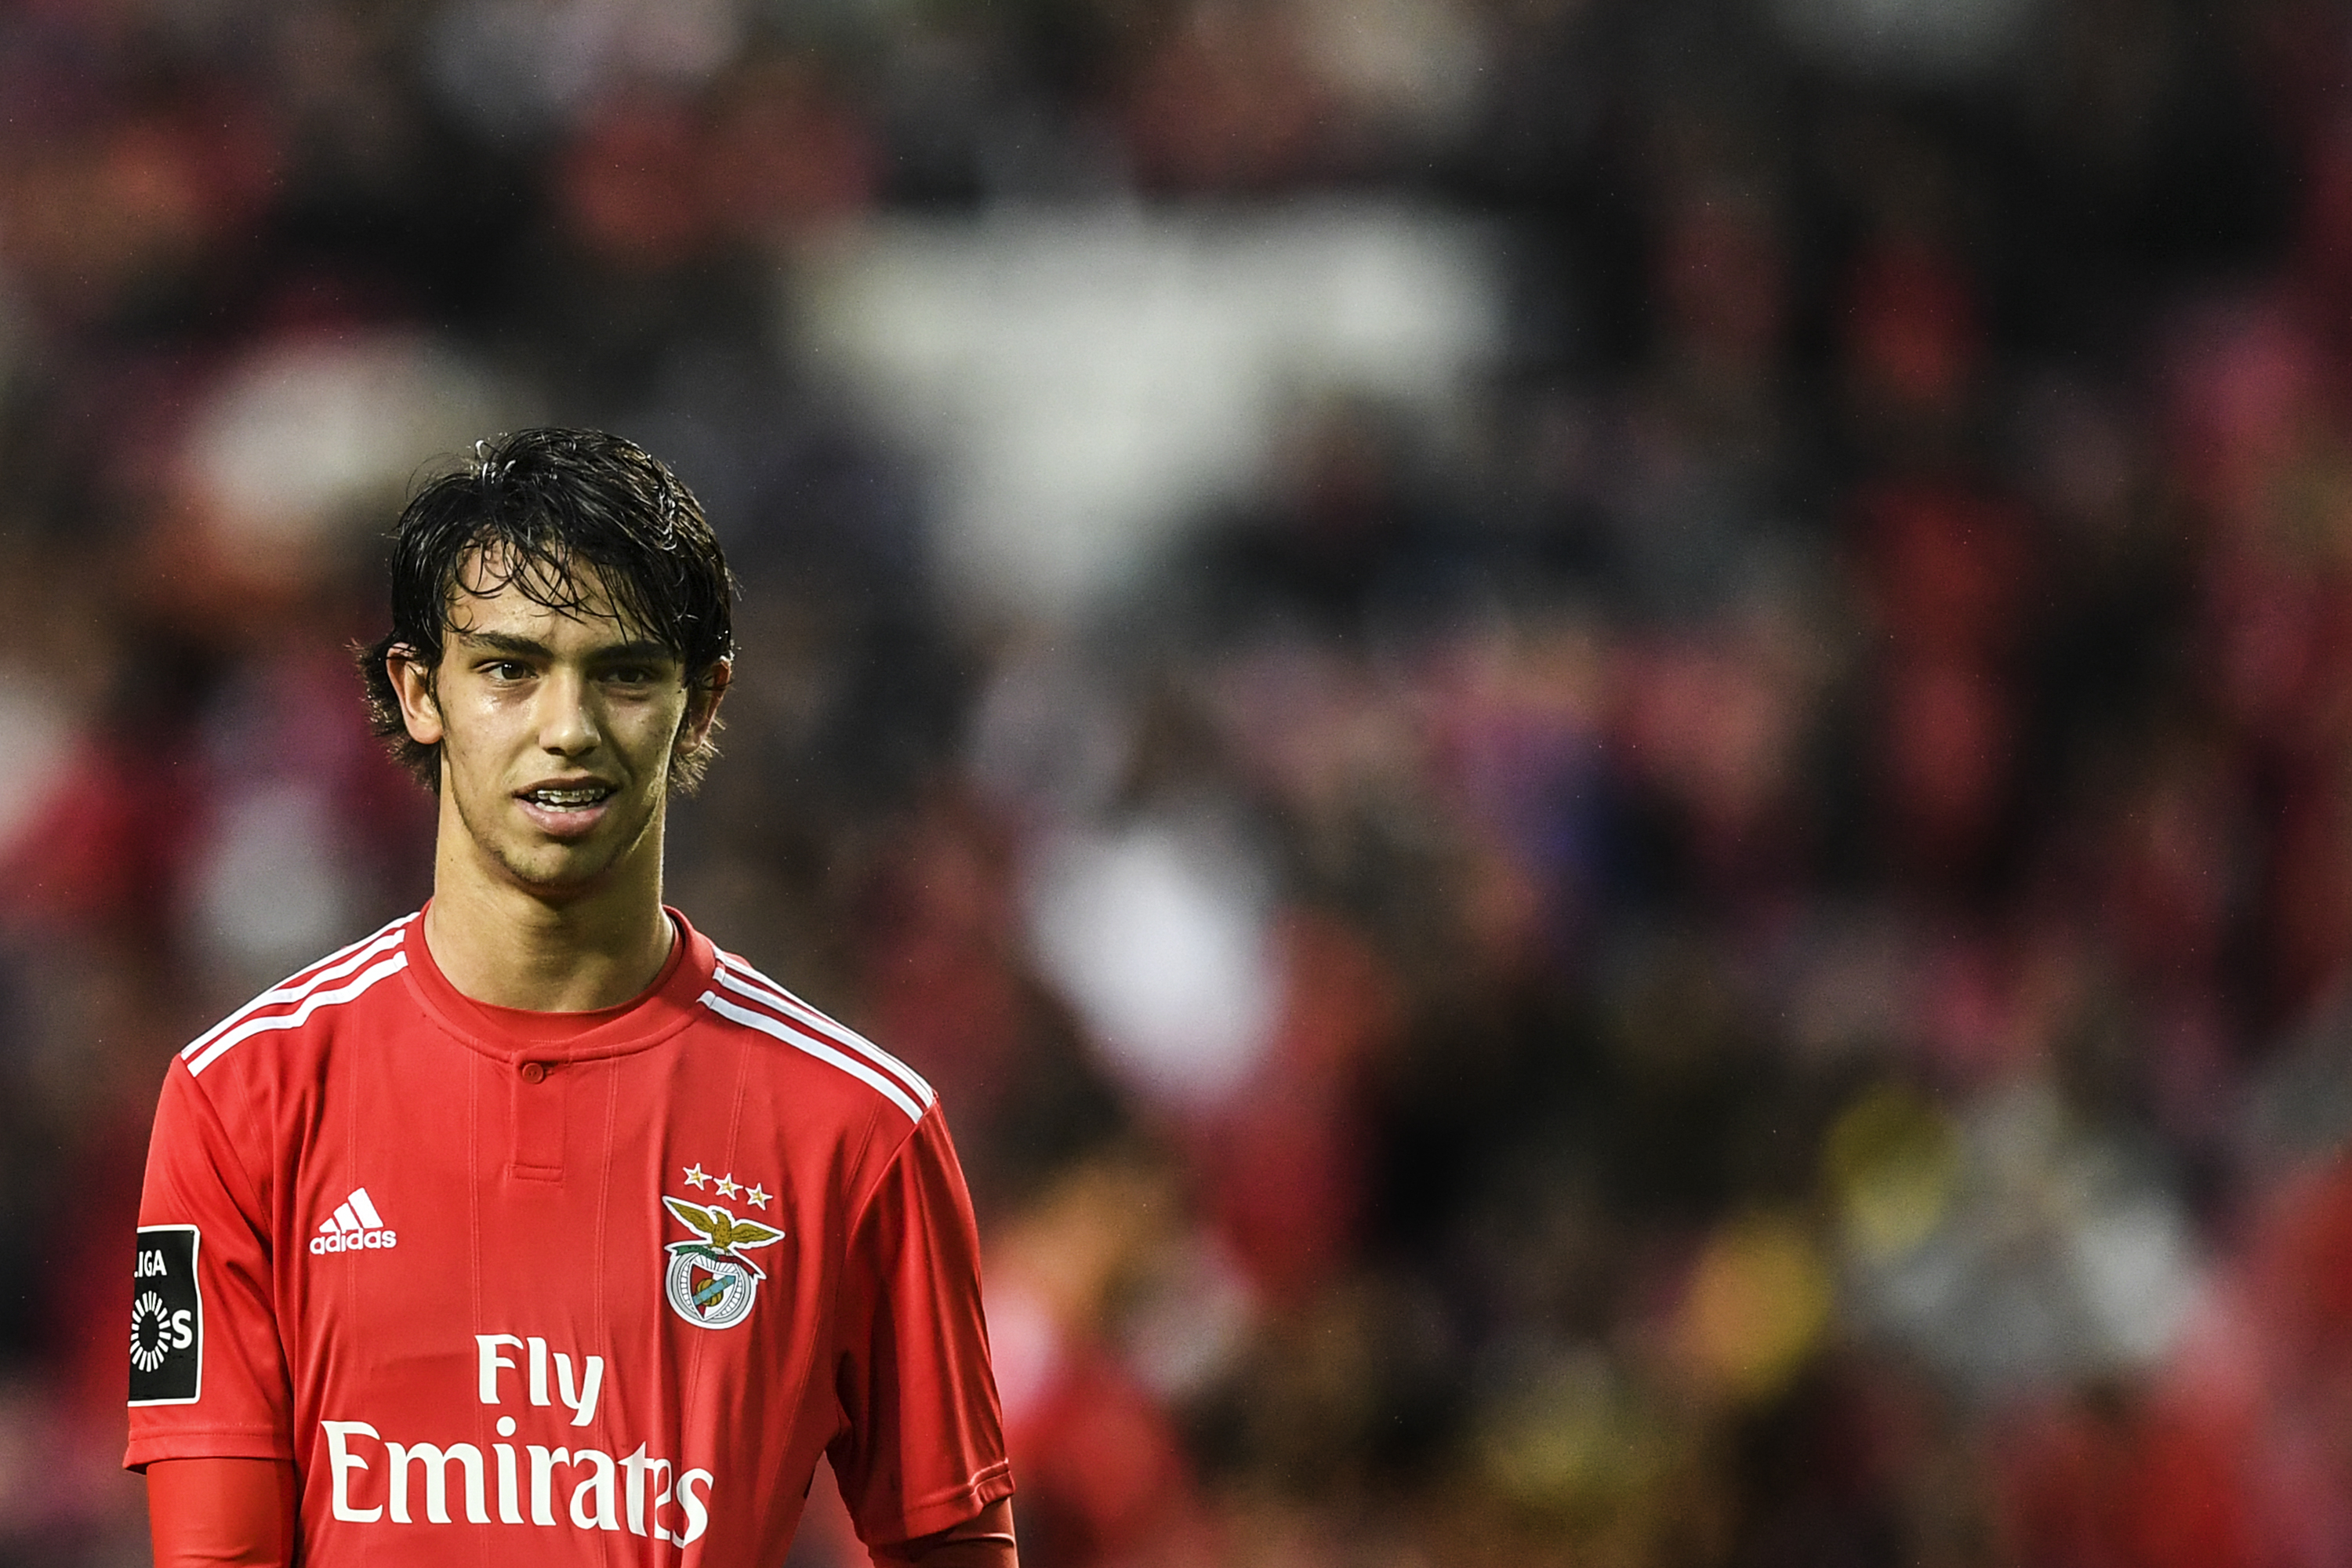 Benfica's midfielder Joao Felix looks on during the Portuguese League football match between SL Benfica and CD Nacional at the Luz stadium in Lisbon on February 10, 2019. (Photo by PATRICIA DE MELO MOREIRA / AFP)        (Photo credit should read PATRICIA DE MELO MOREIRA/AFP/Getty Images)